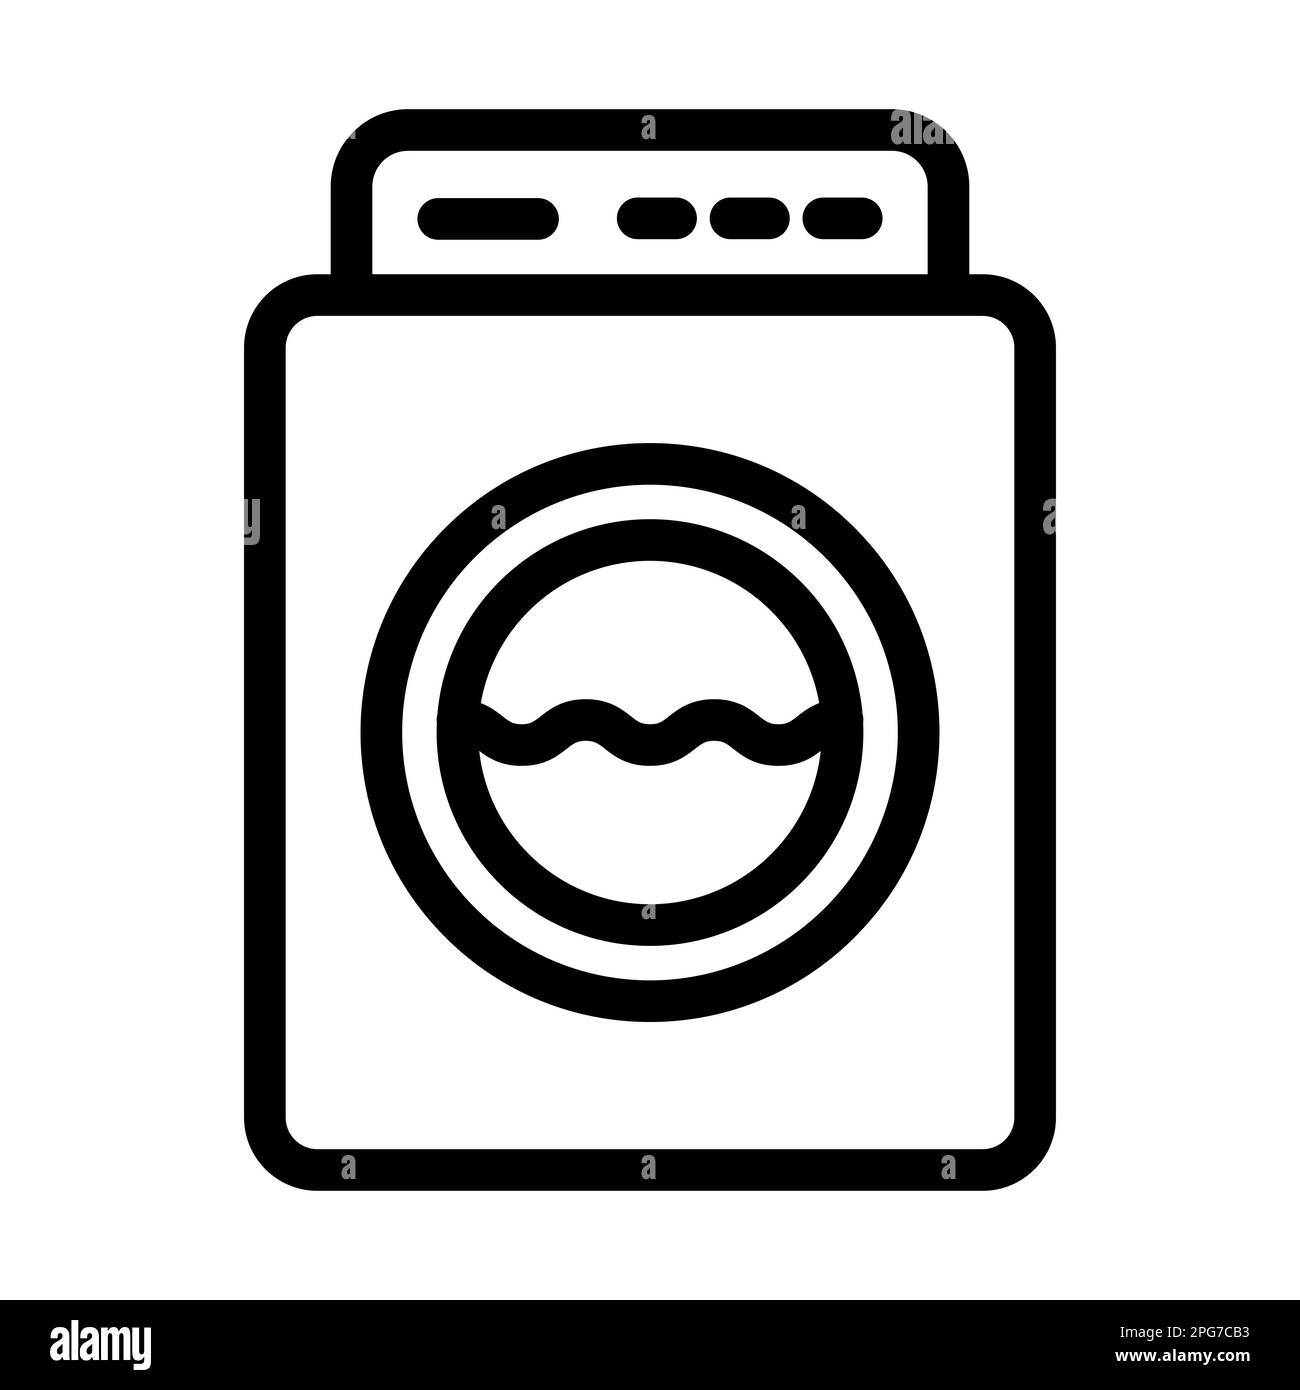 Washing Machine Vector Thick Line Icon For Personal And Commercial Use. Stock Photo